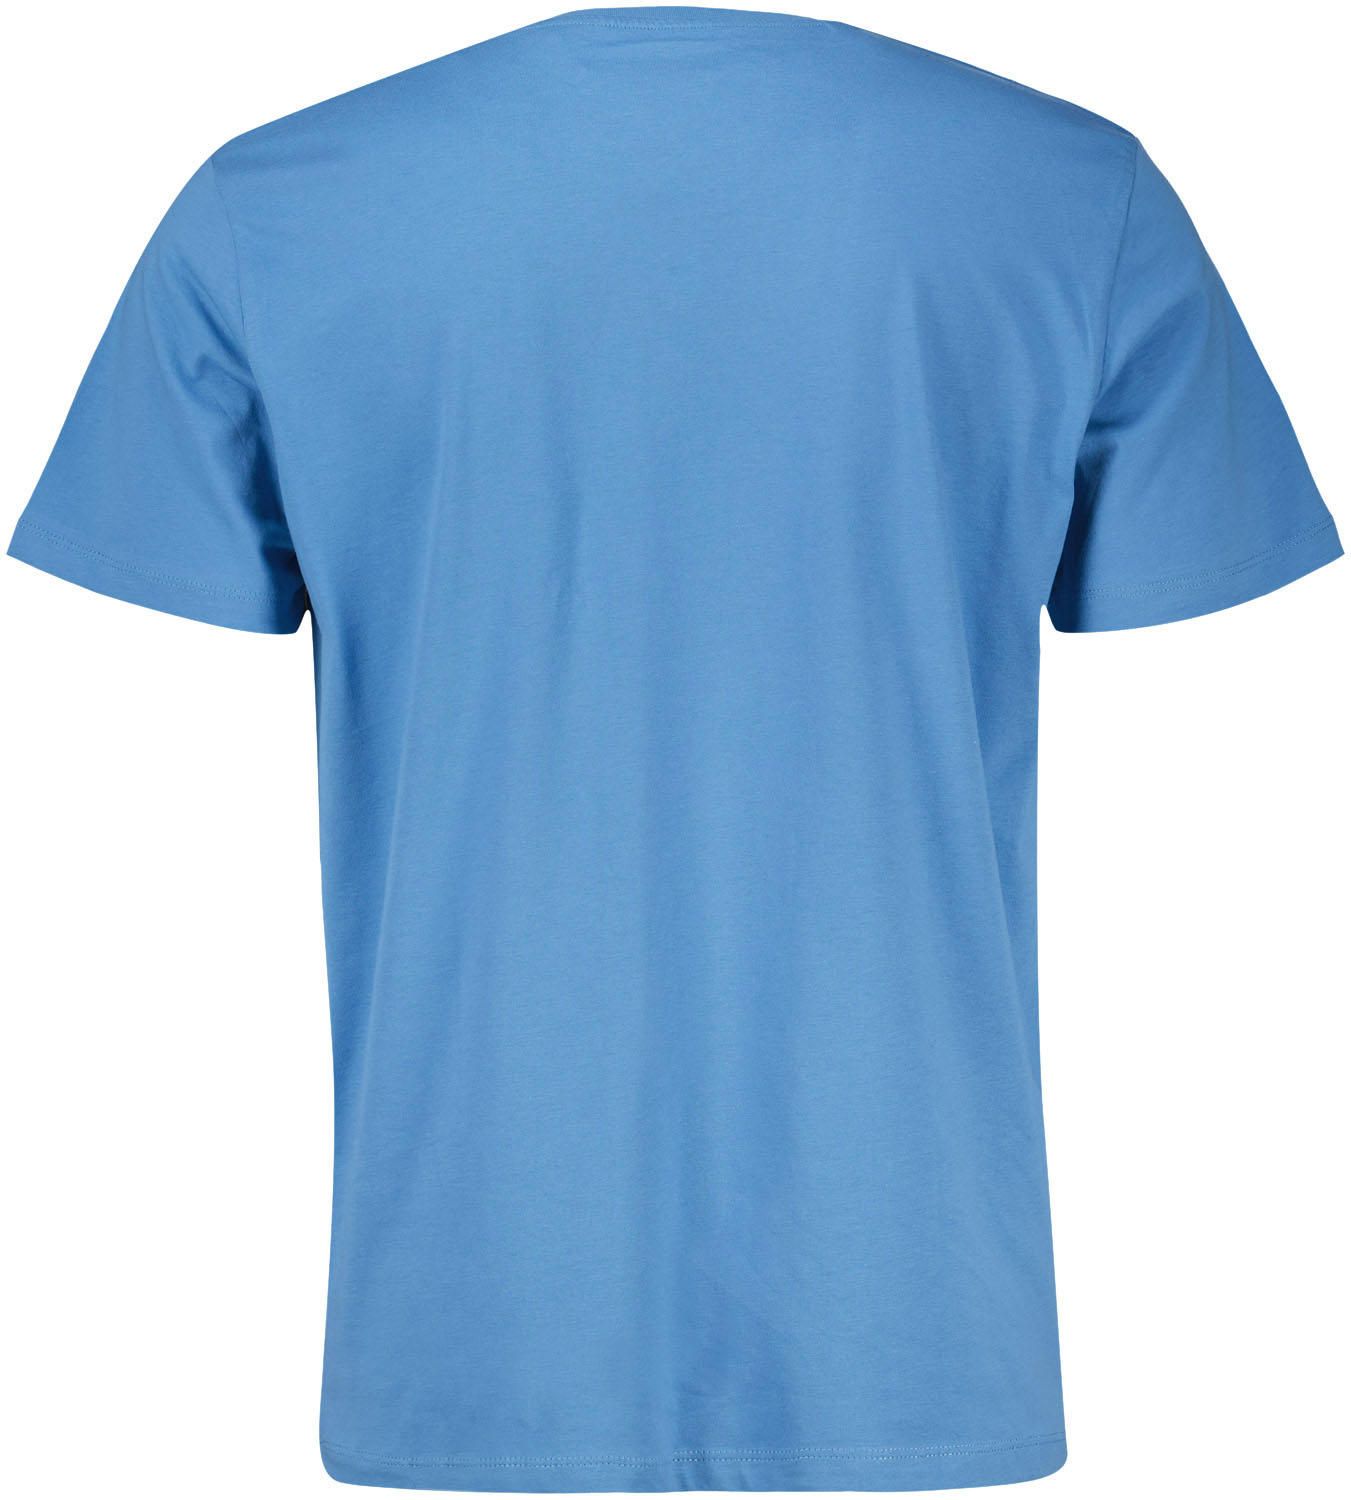 Selected Homme T-shirt Blauw 